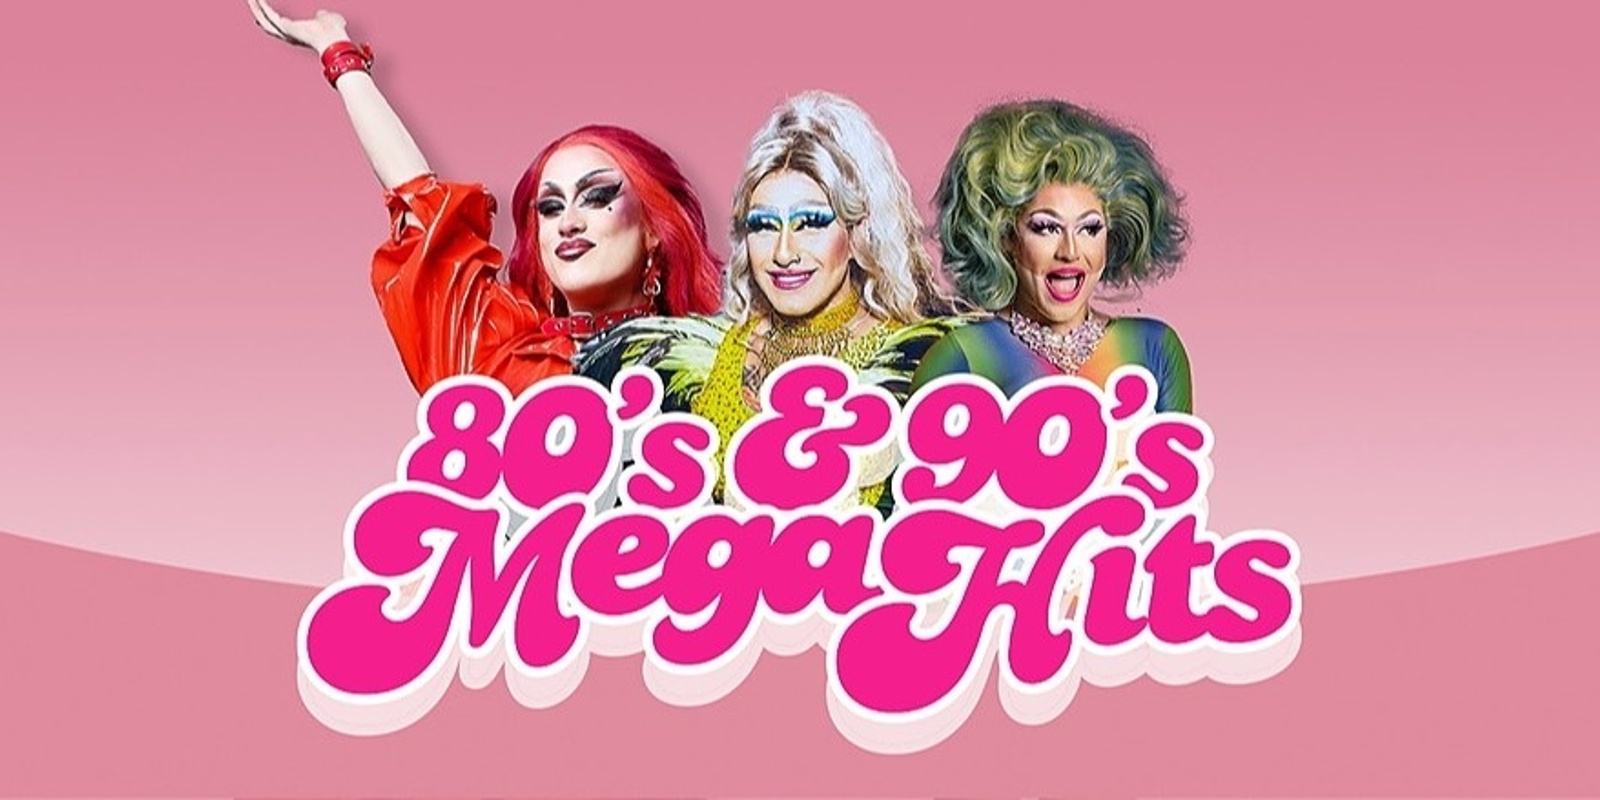 Banner image for 80s & 90s Drag Queen Show - Busselton